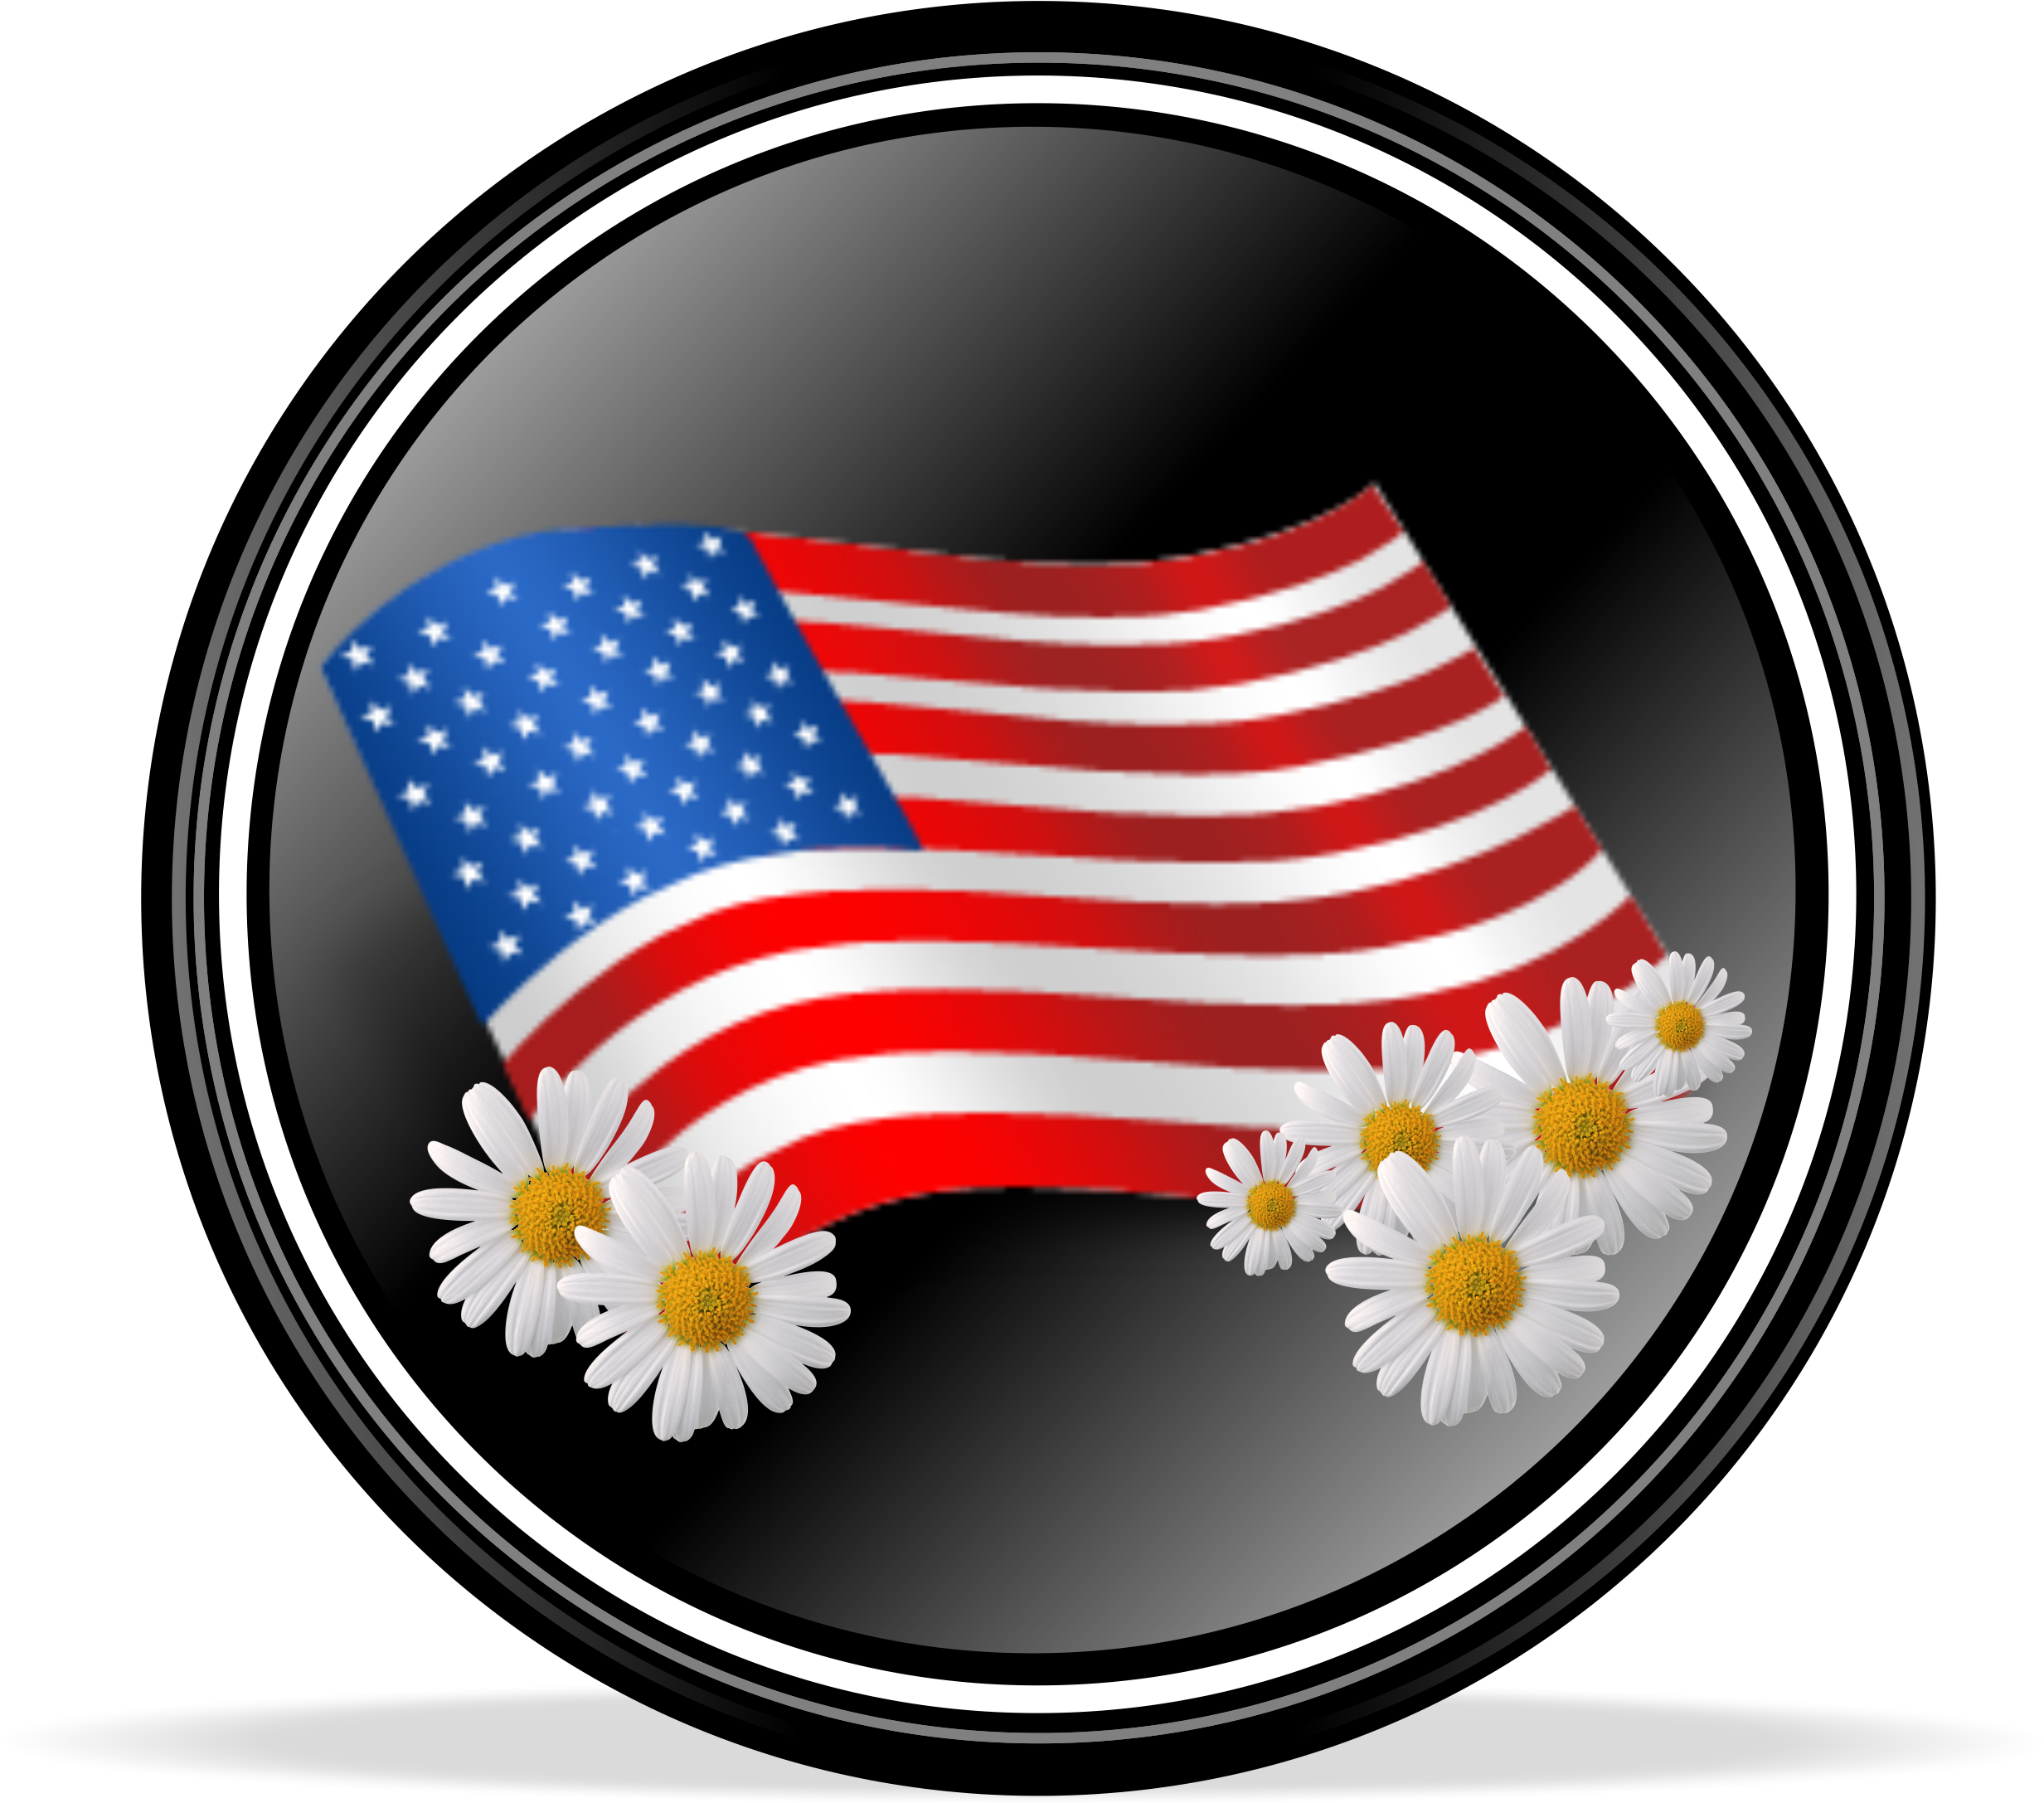 A Flag And Flowers On A Black Background